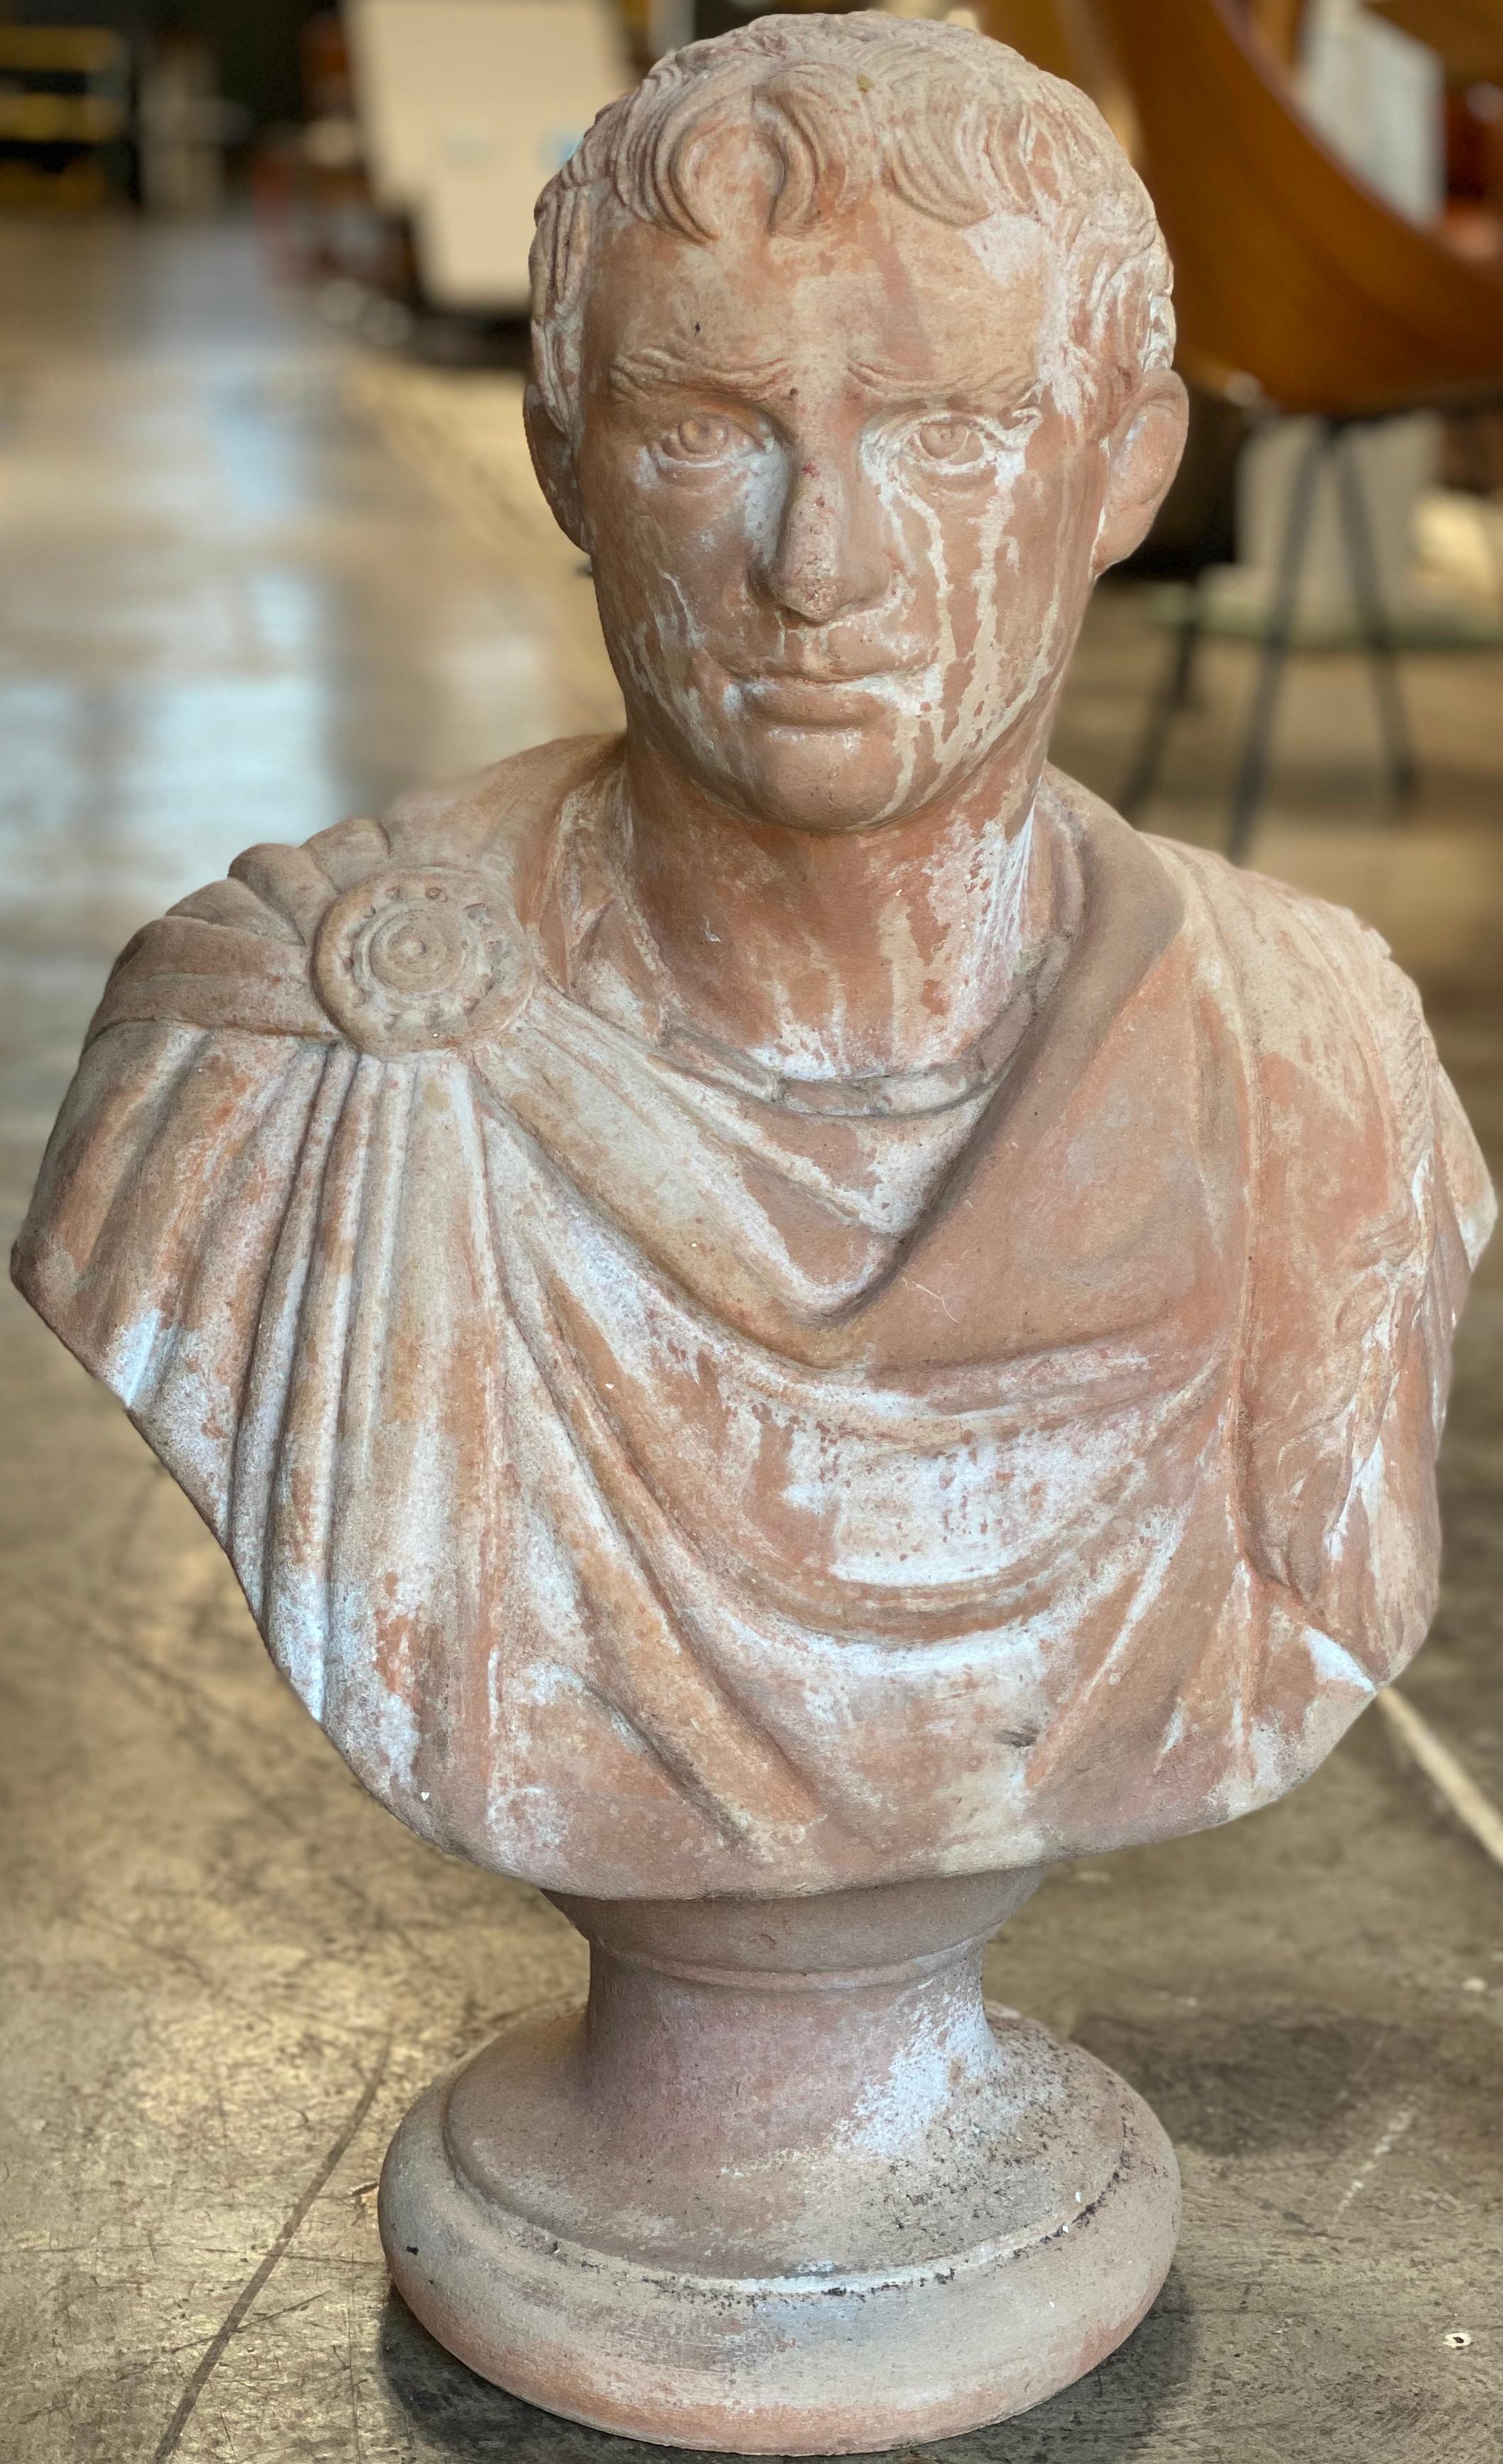 Emperor Augustus Caesar, Roman statesman and military leader, first Emperor of the Roman Empire, captured in an impressive bust: hand-sculpted detail of old well-patinated terracotta from Impruneta, Florence, circa 1890.